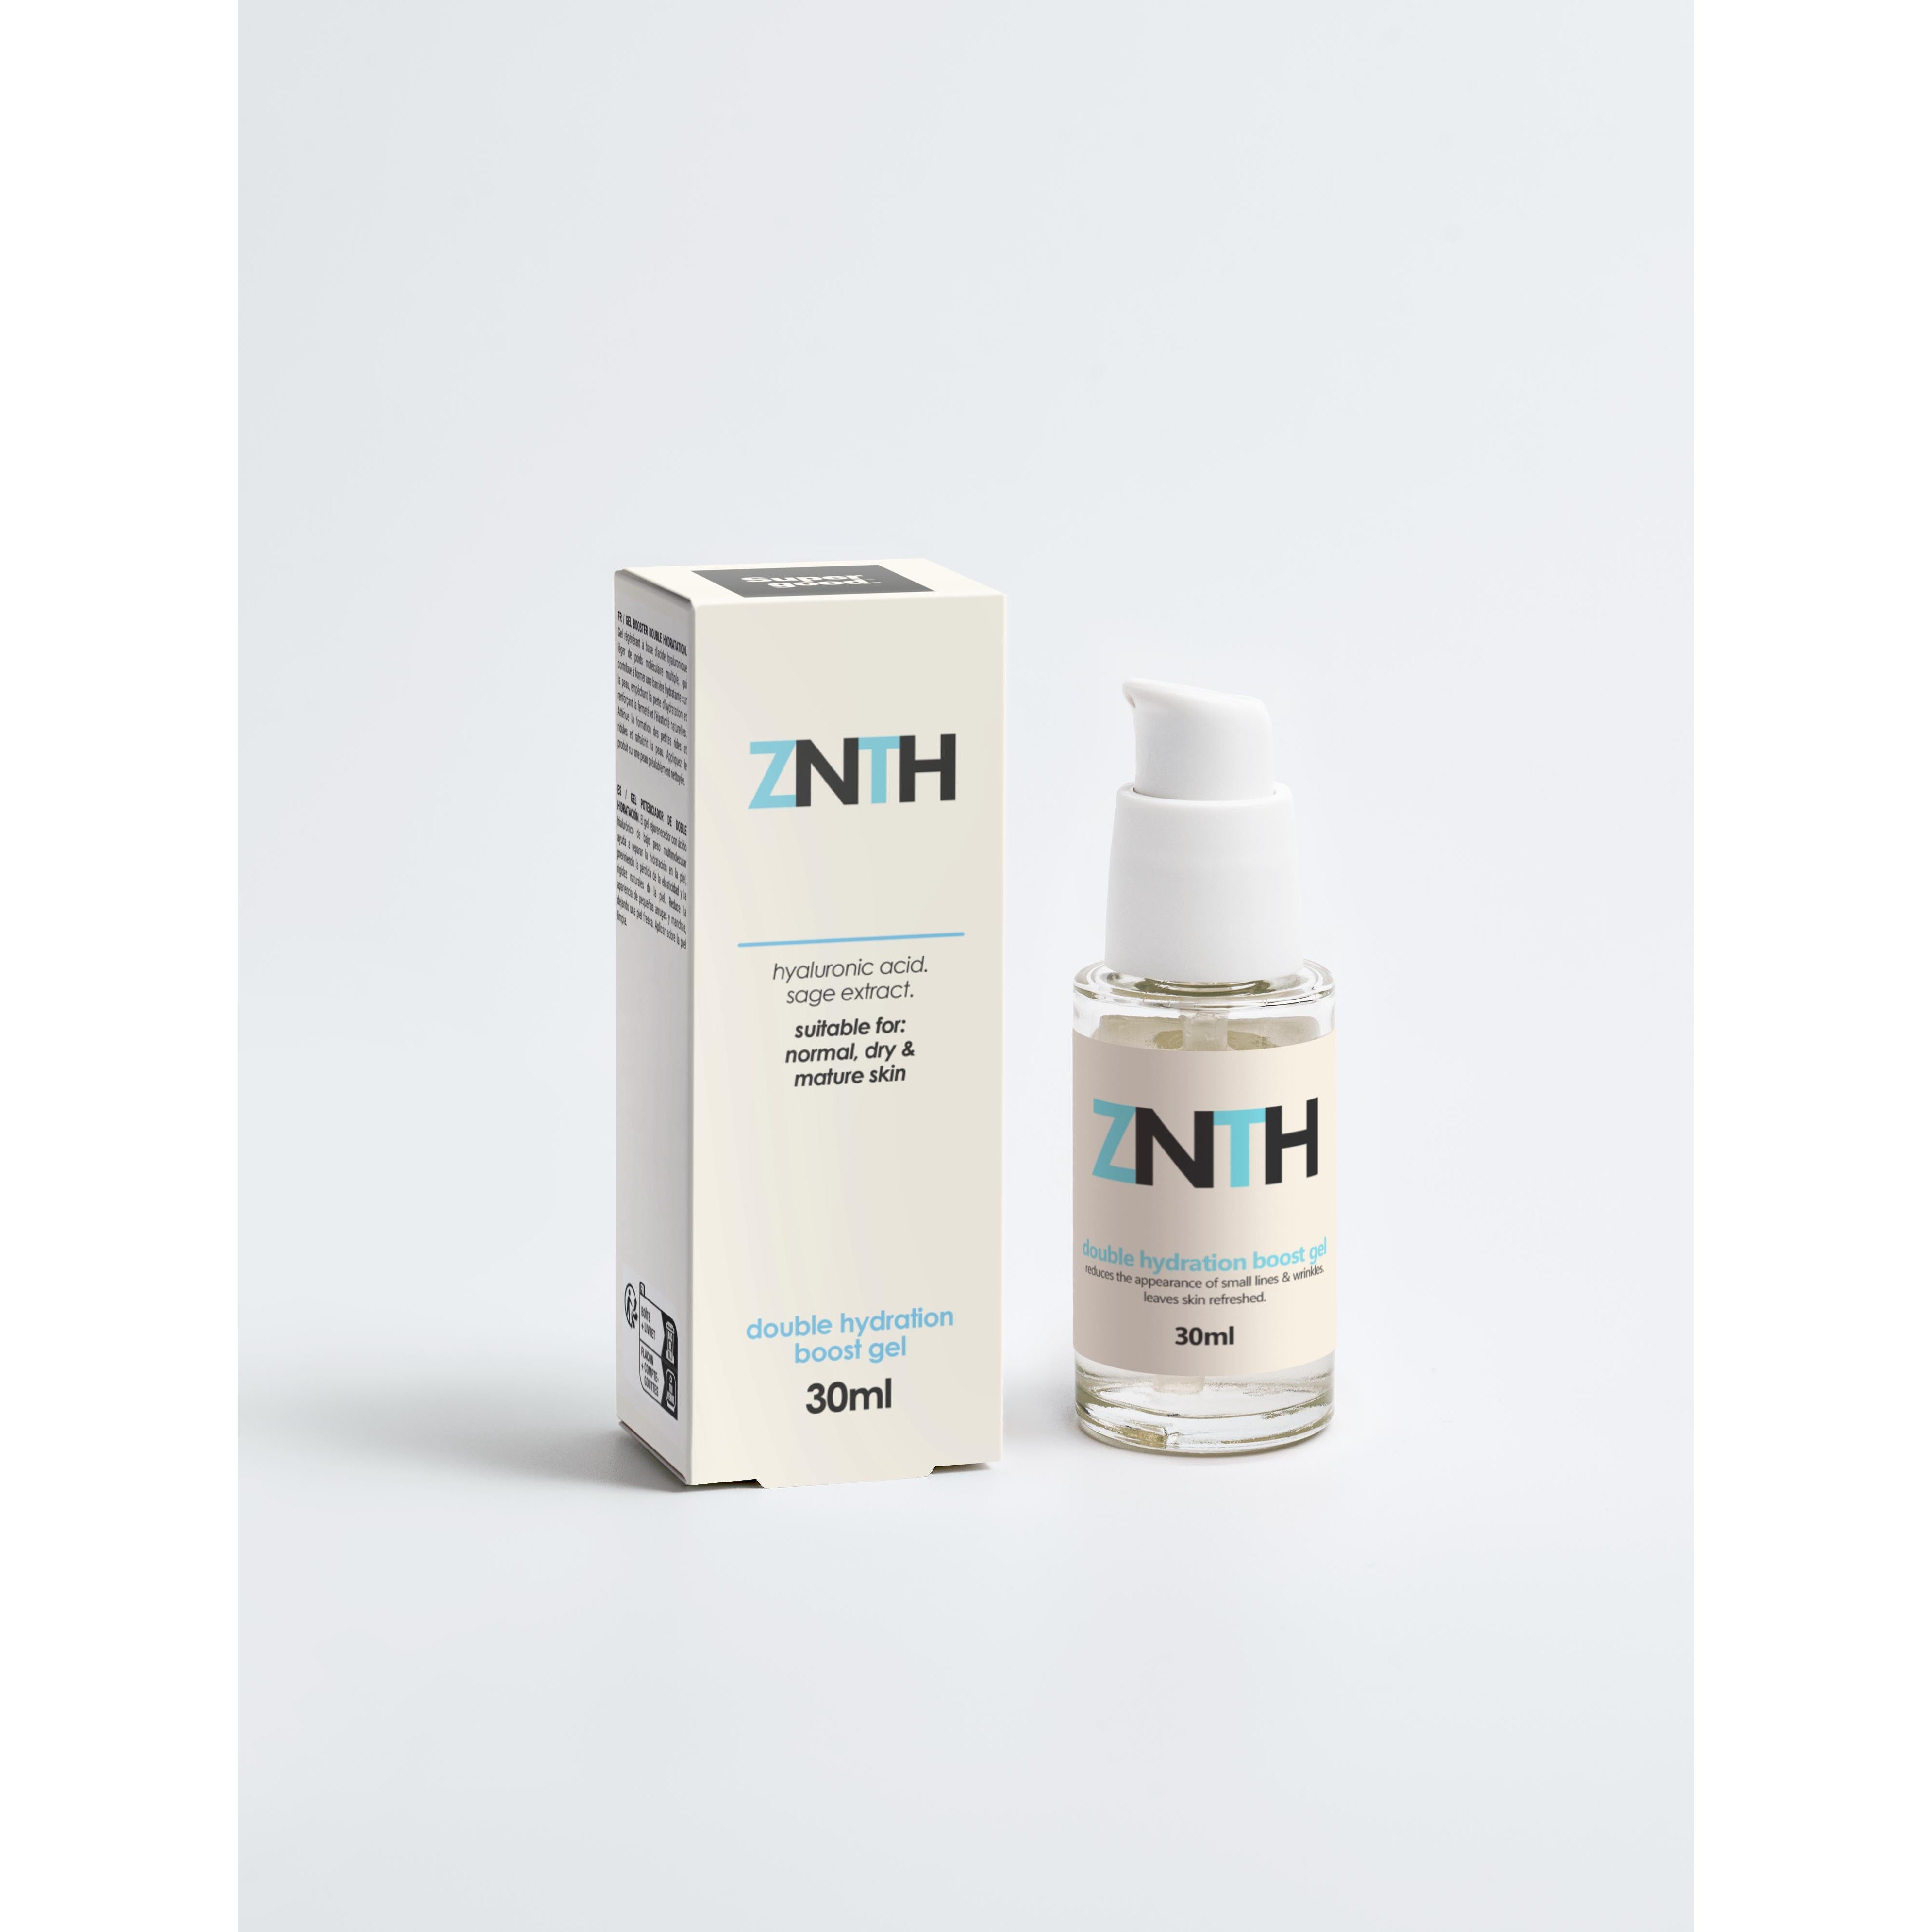 Double Hydration Boost Gel by ZNTH.-Supergood.